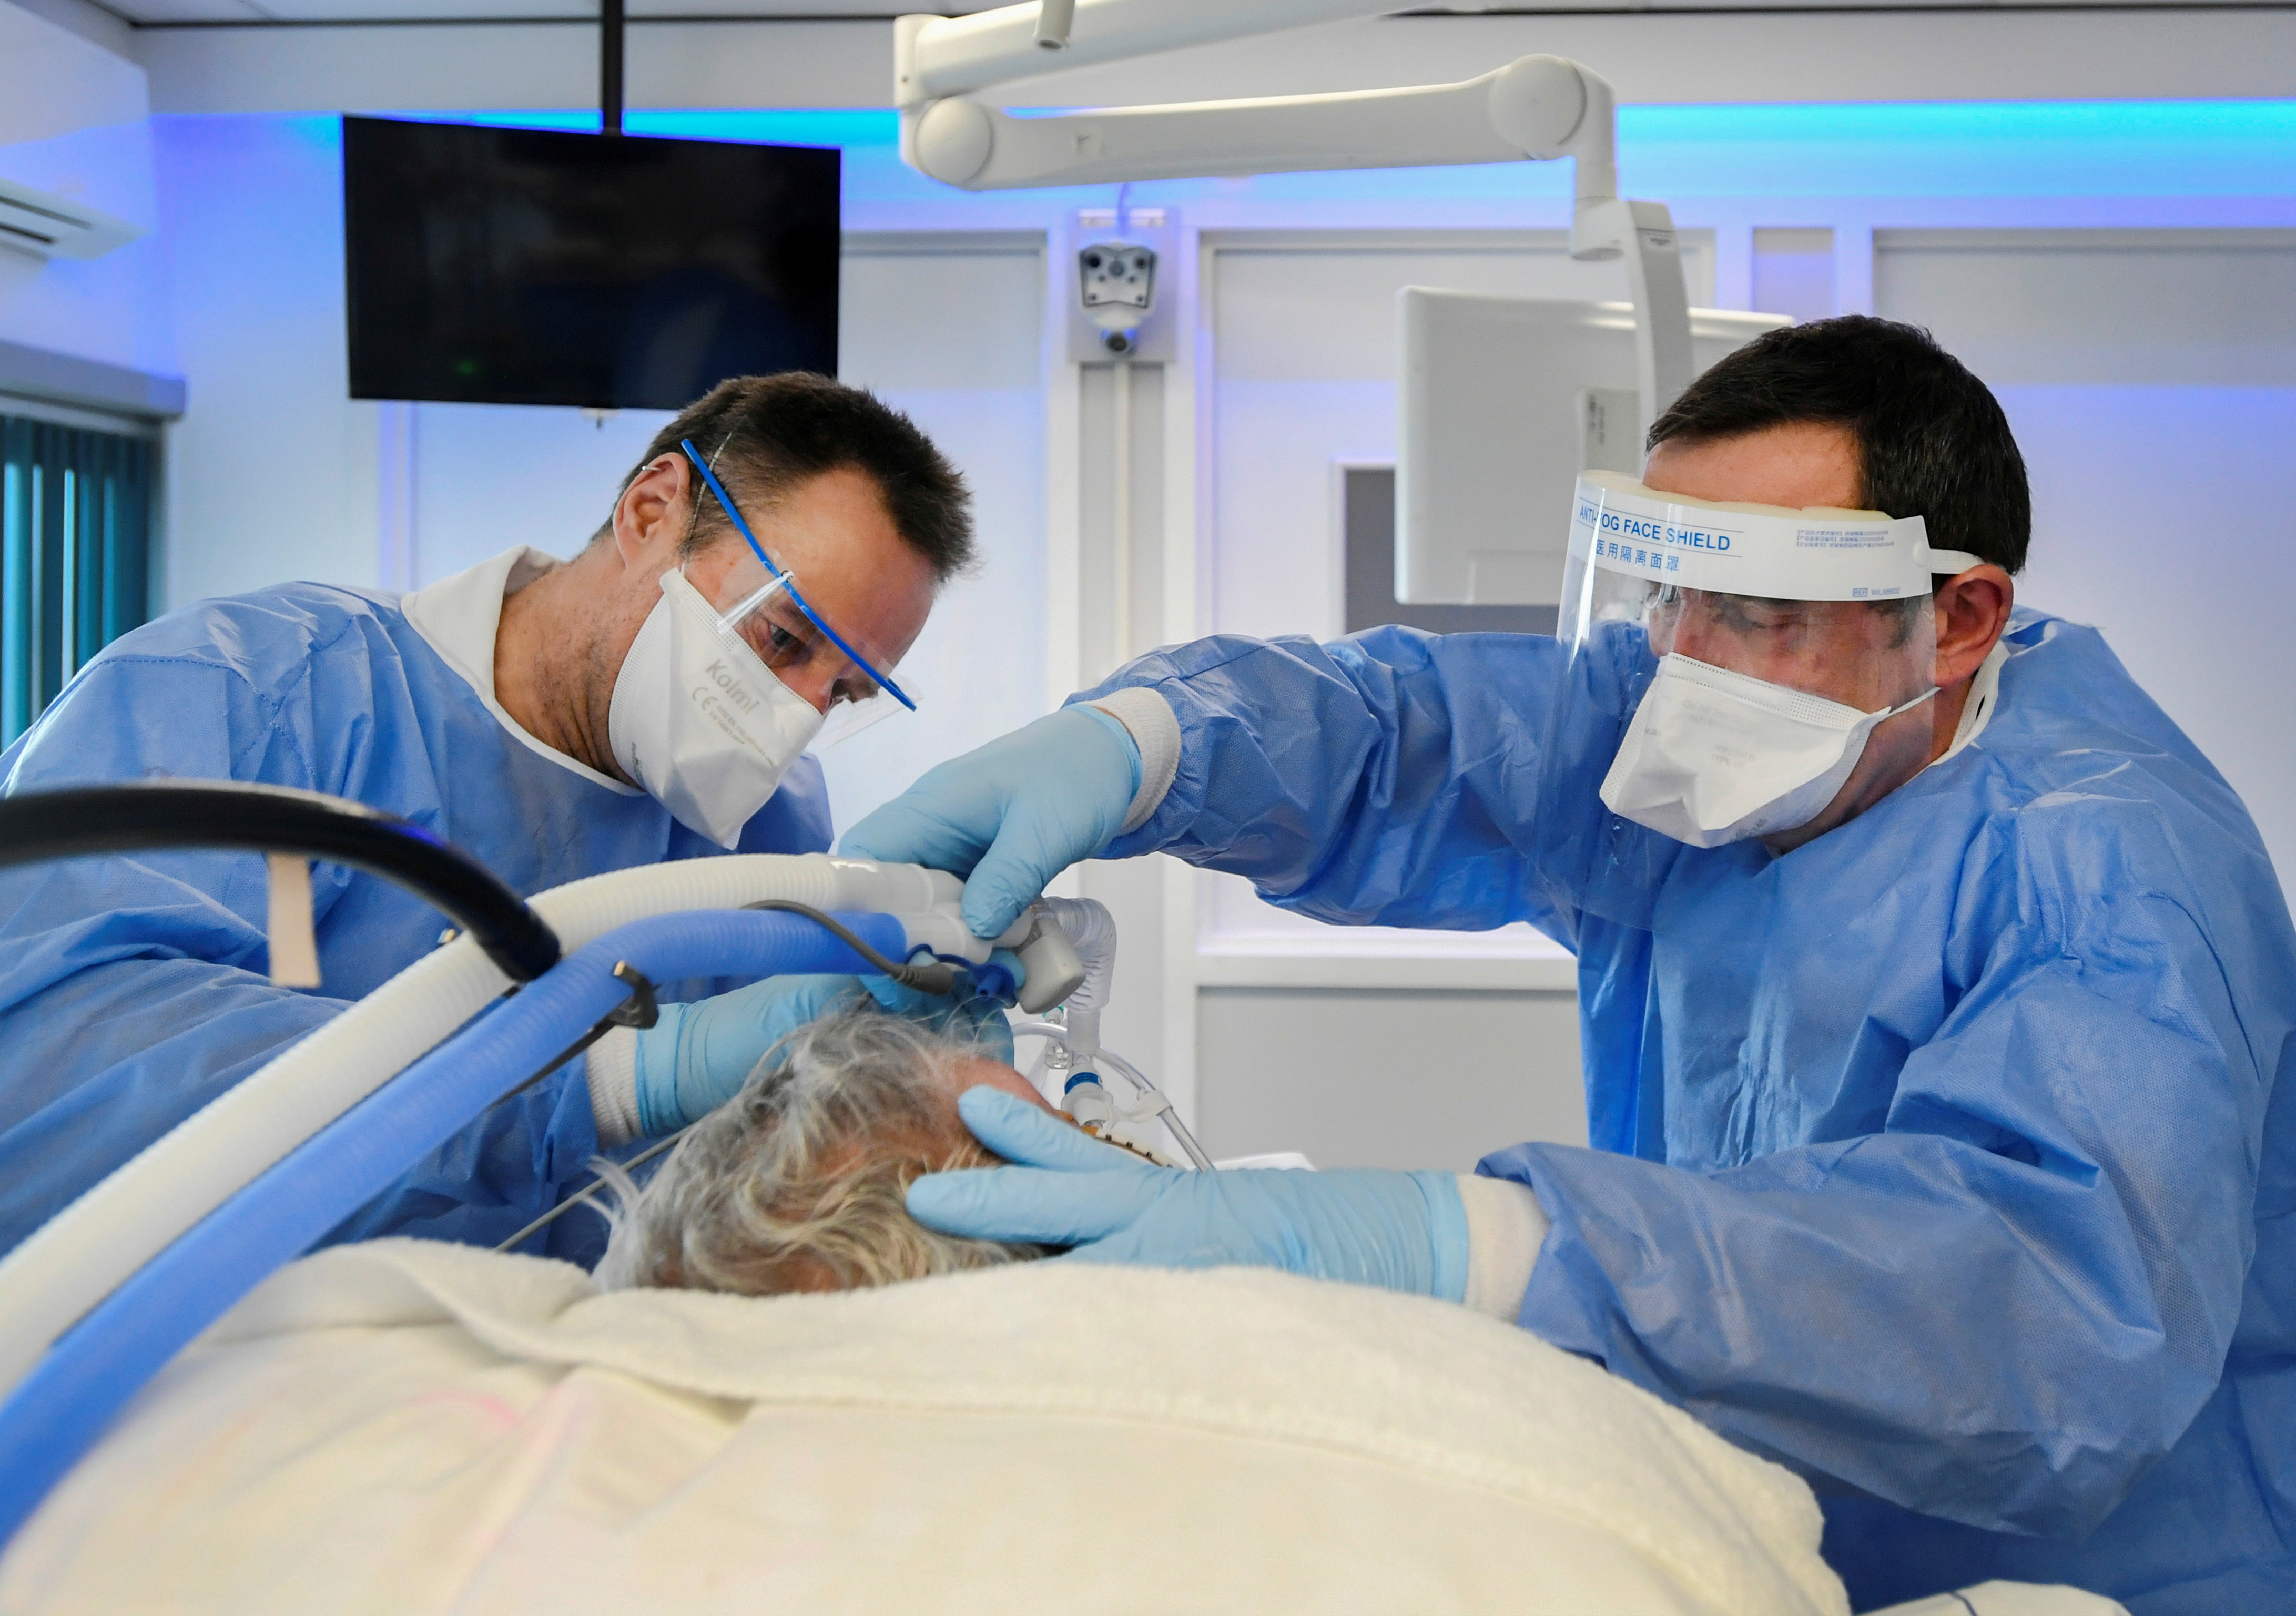 Medics treat a patient infected with COVID-19, in the intensive care unit at Maastricht UMC+ Hospital in Maastricht, Netherlands